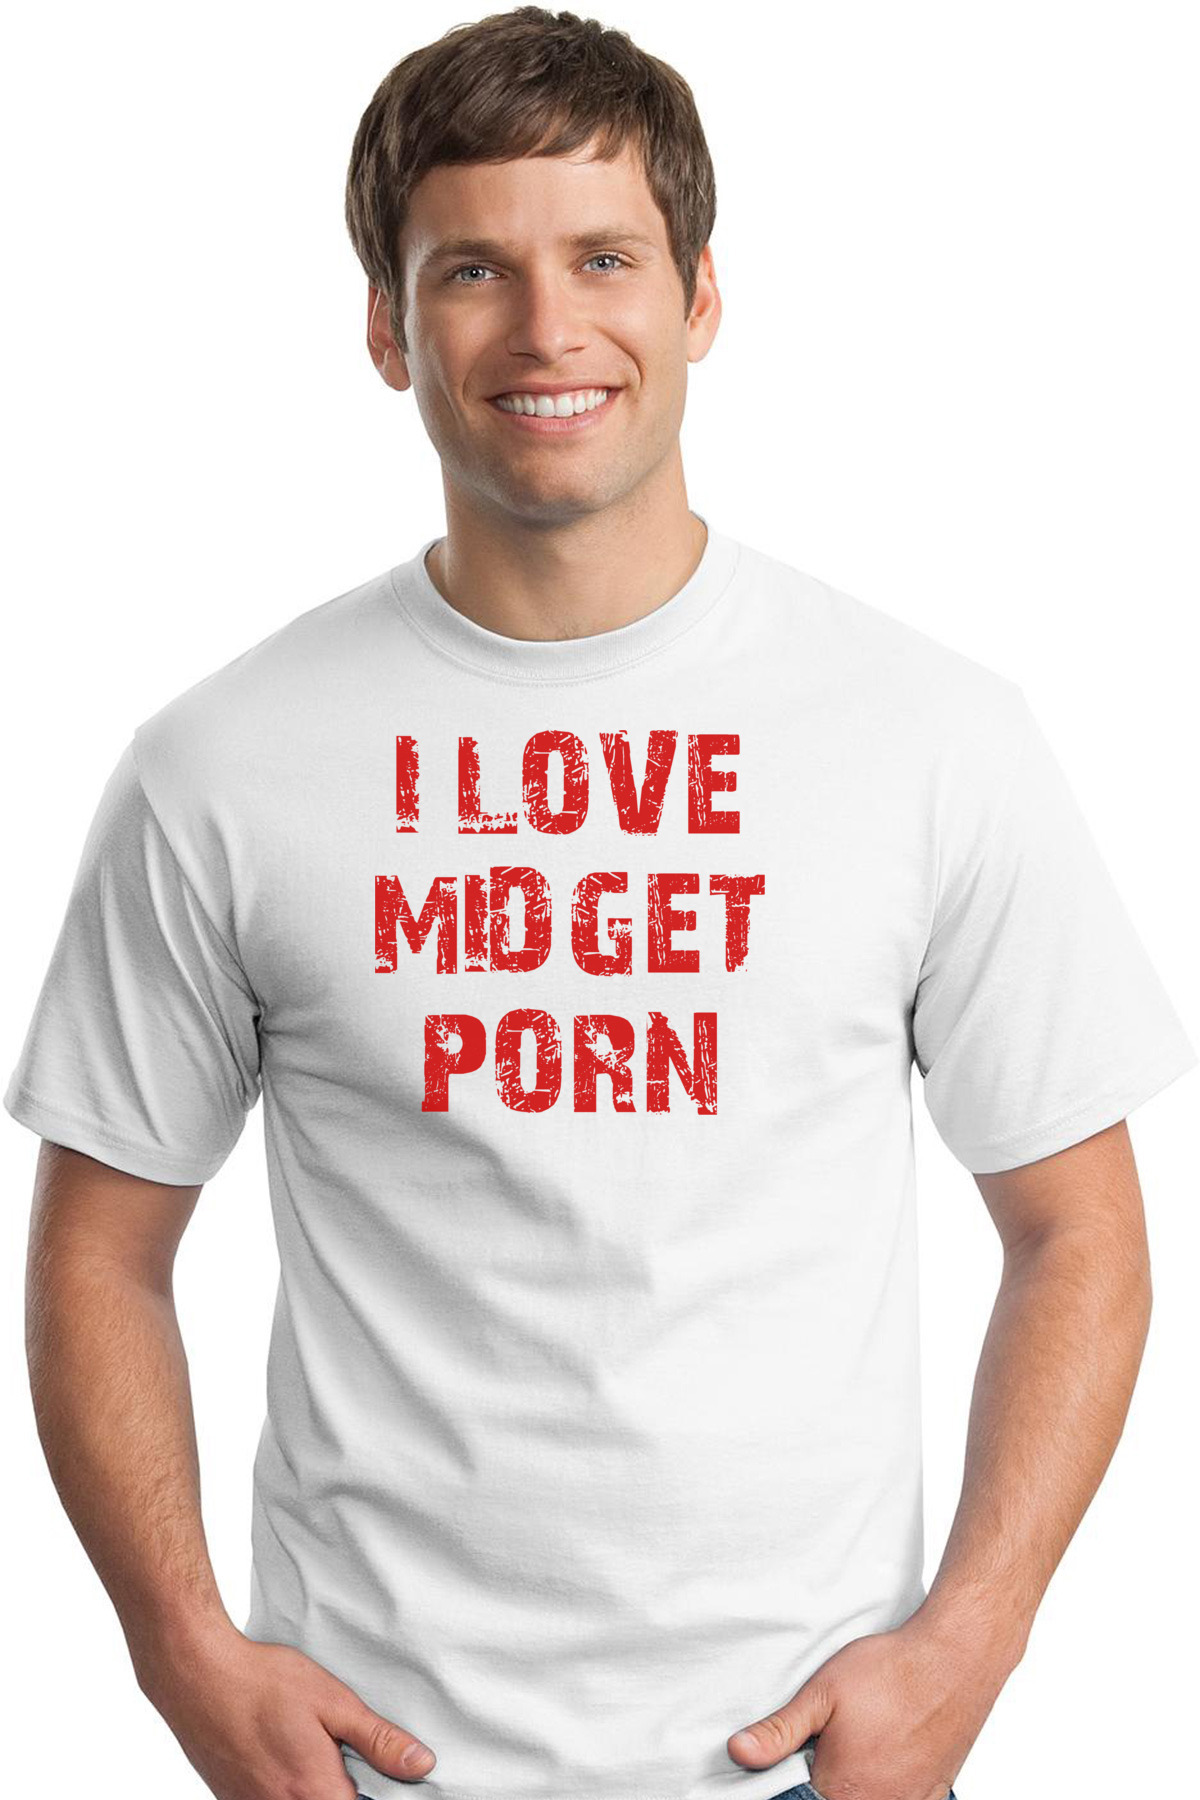 The C. recomended shirt midget wins